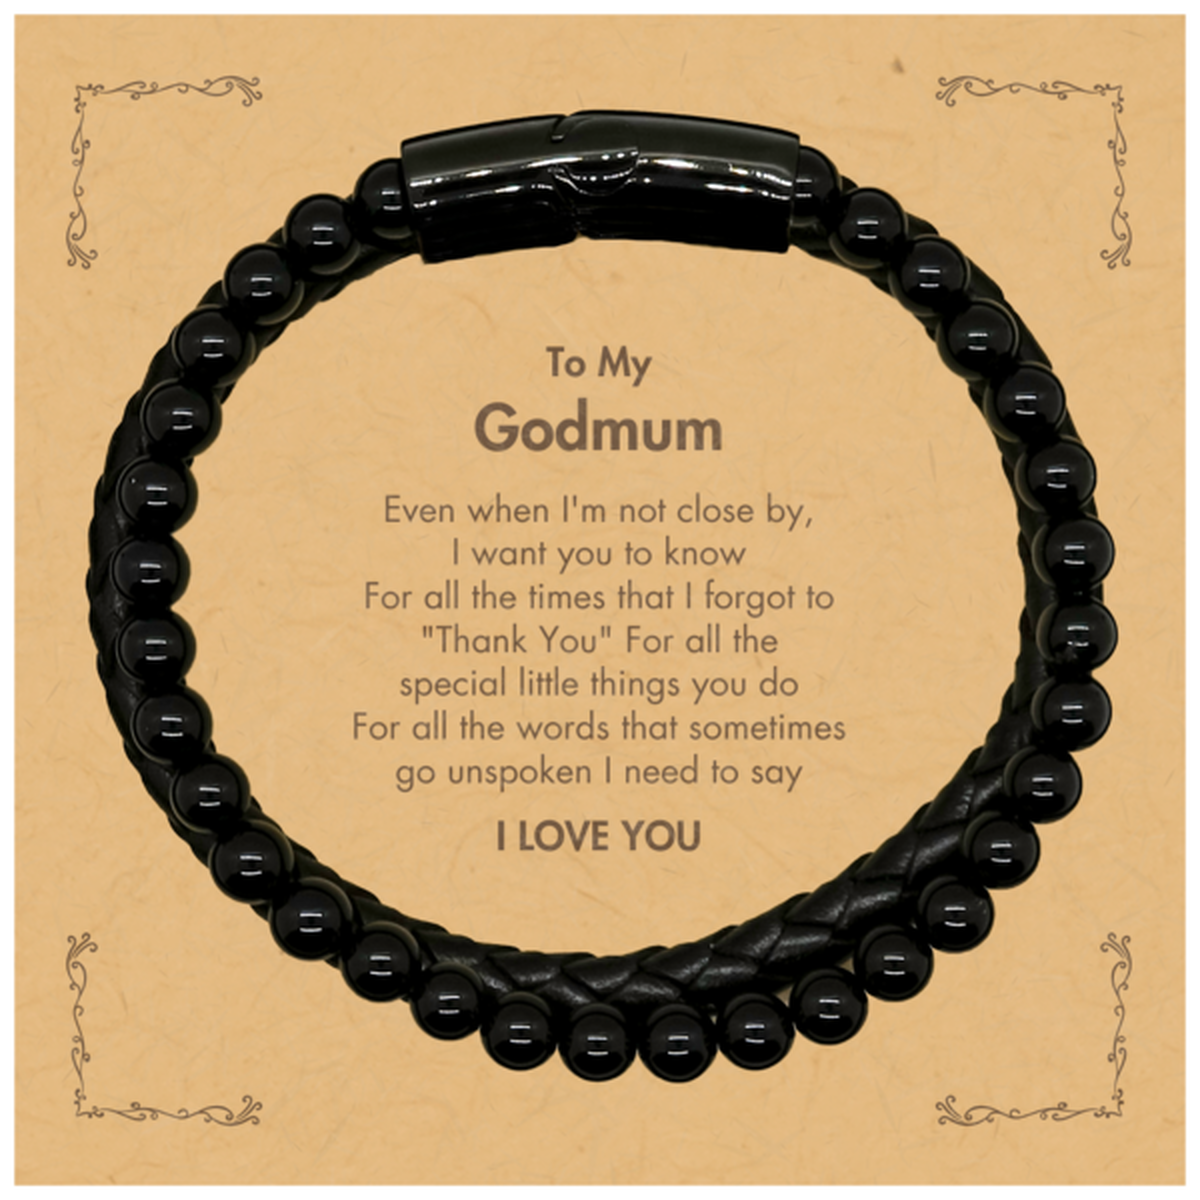 Thank You Gifts for Godmum, Keepsake Stone Leather Bracelets Gifts for Godmum Birthday Mother's day Father's Day Godmum For all the words That sometimes go unspoken I need to say I LOVE YOU